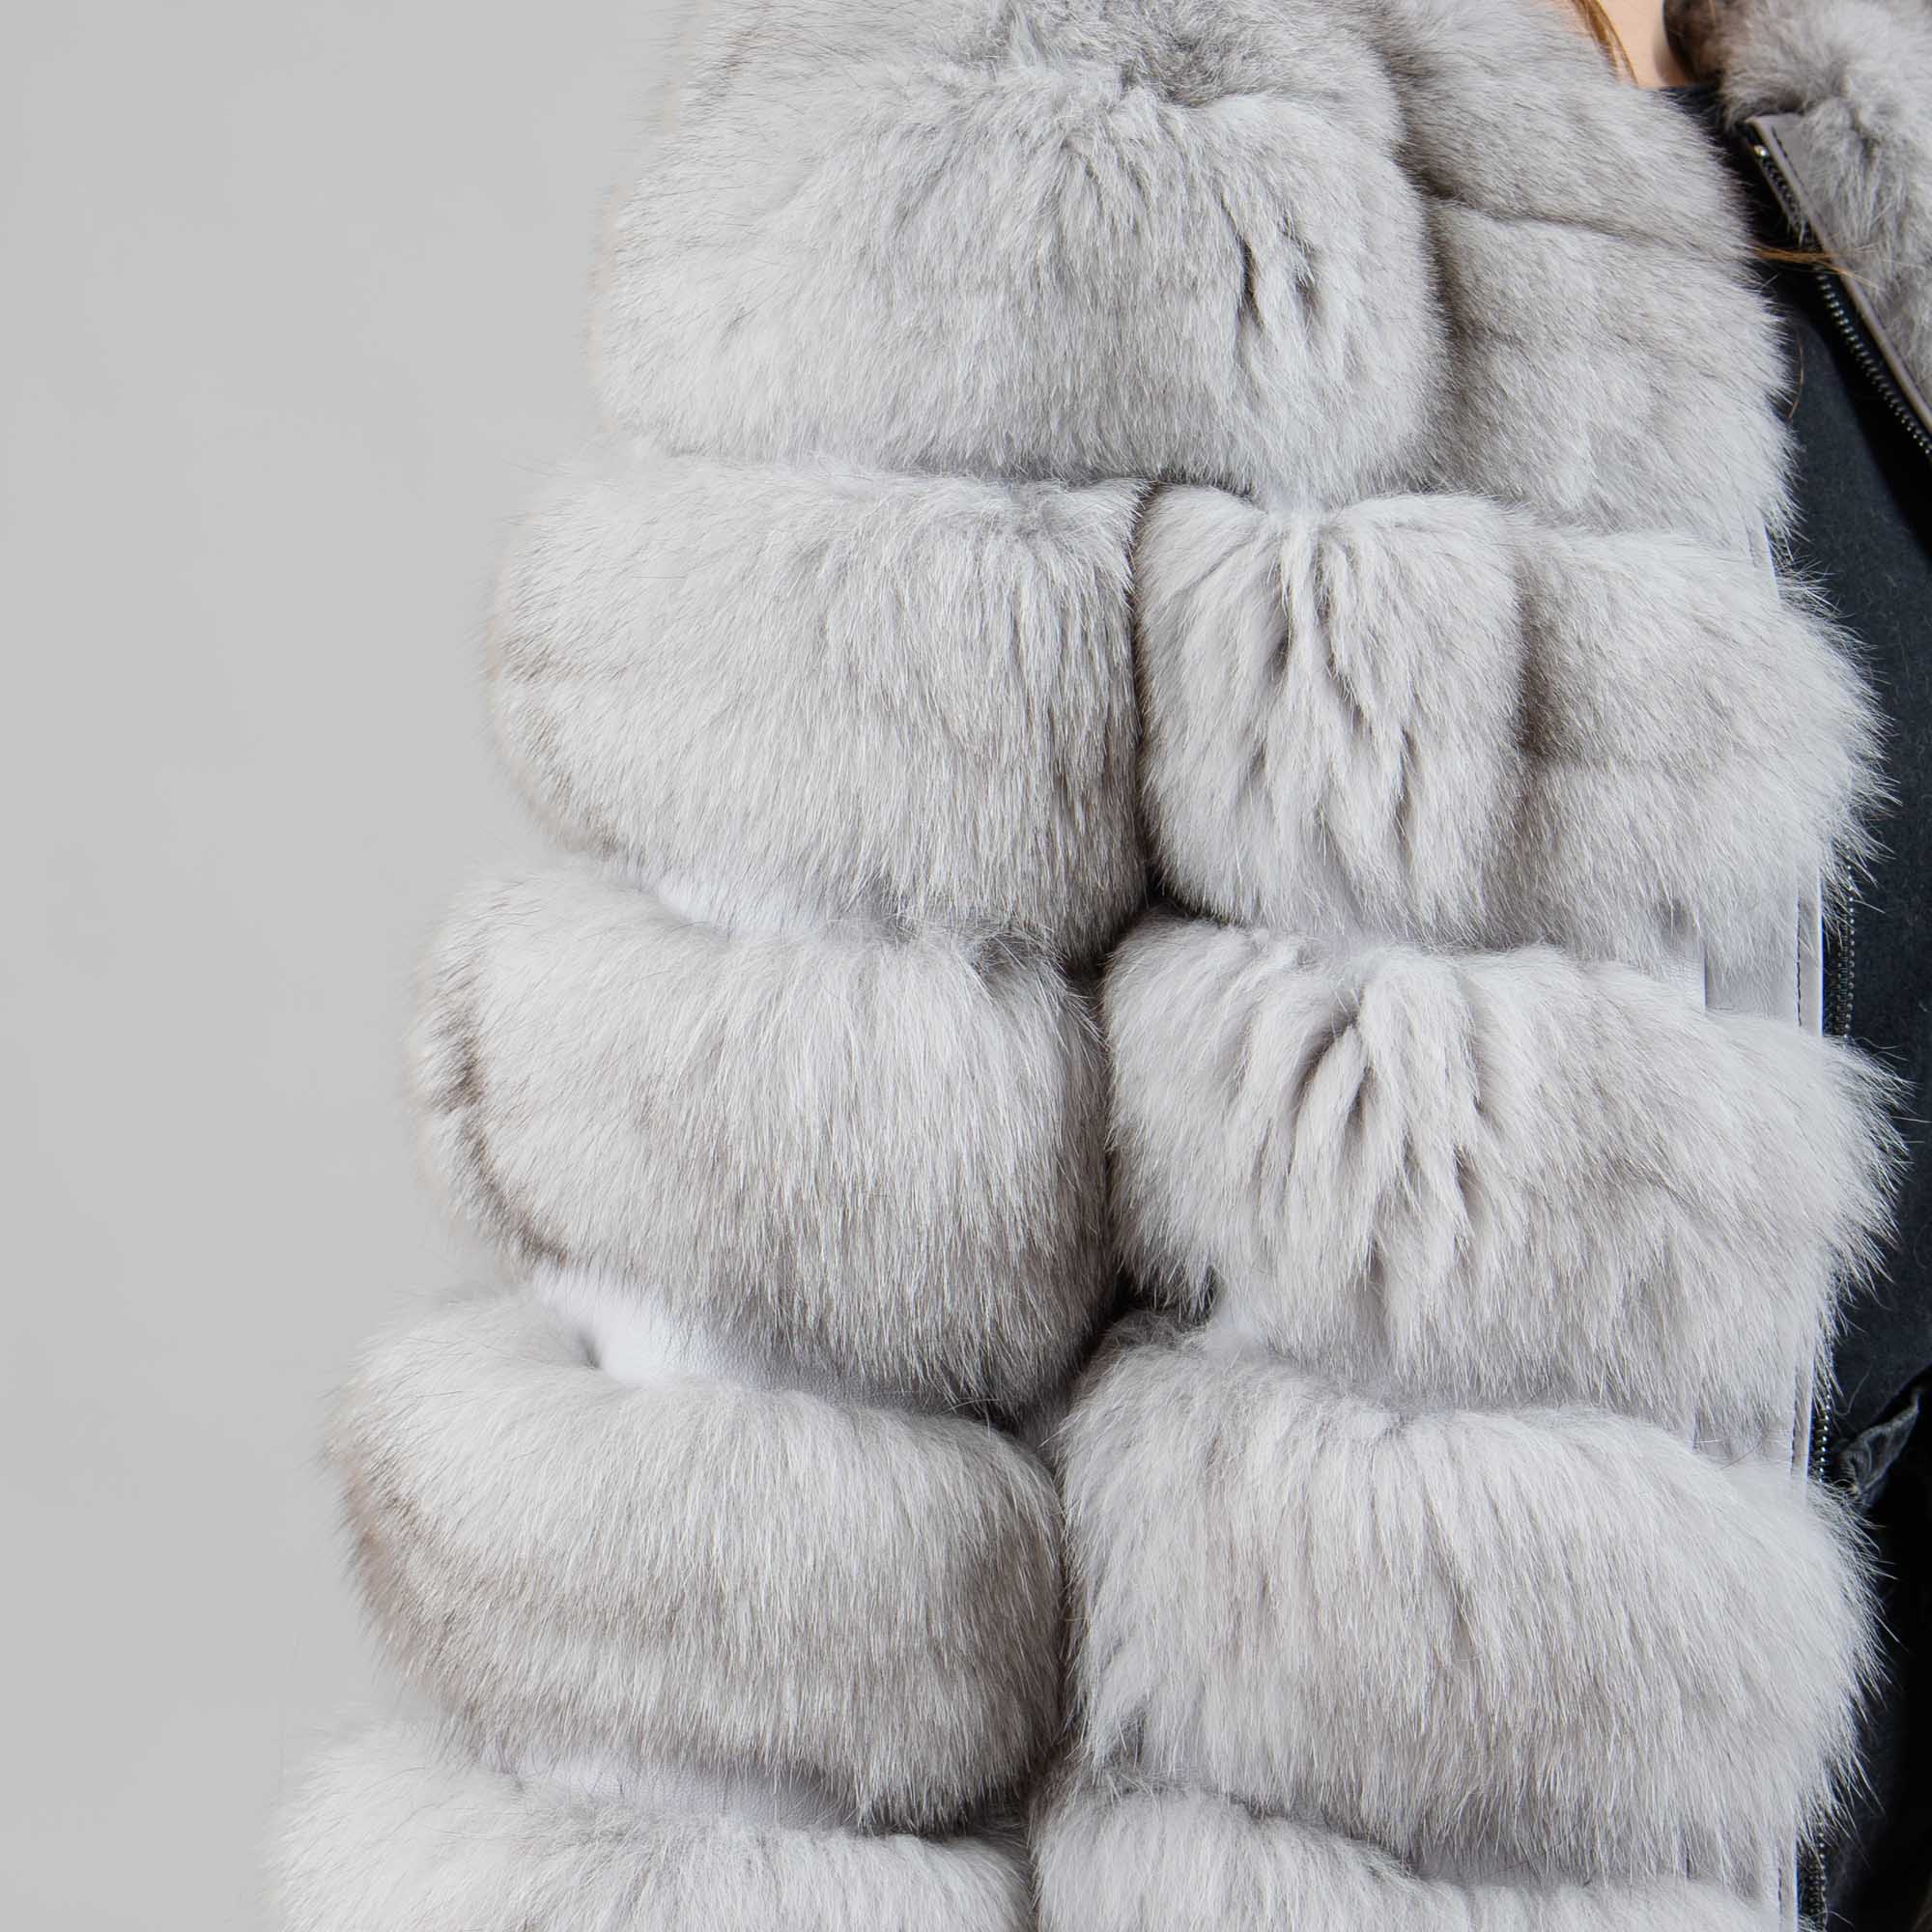 Fox fur jacket with leather details in gray color